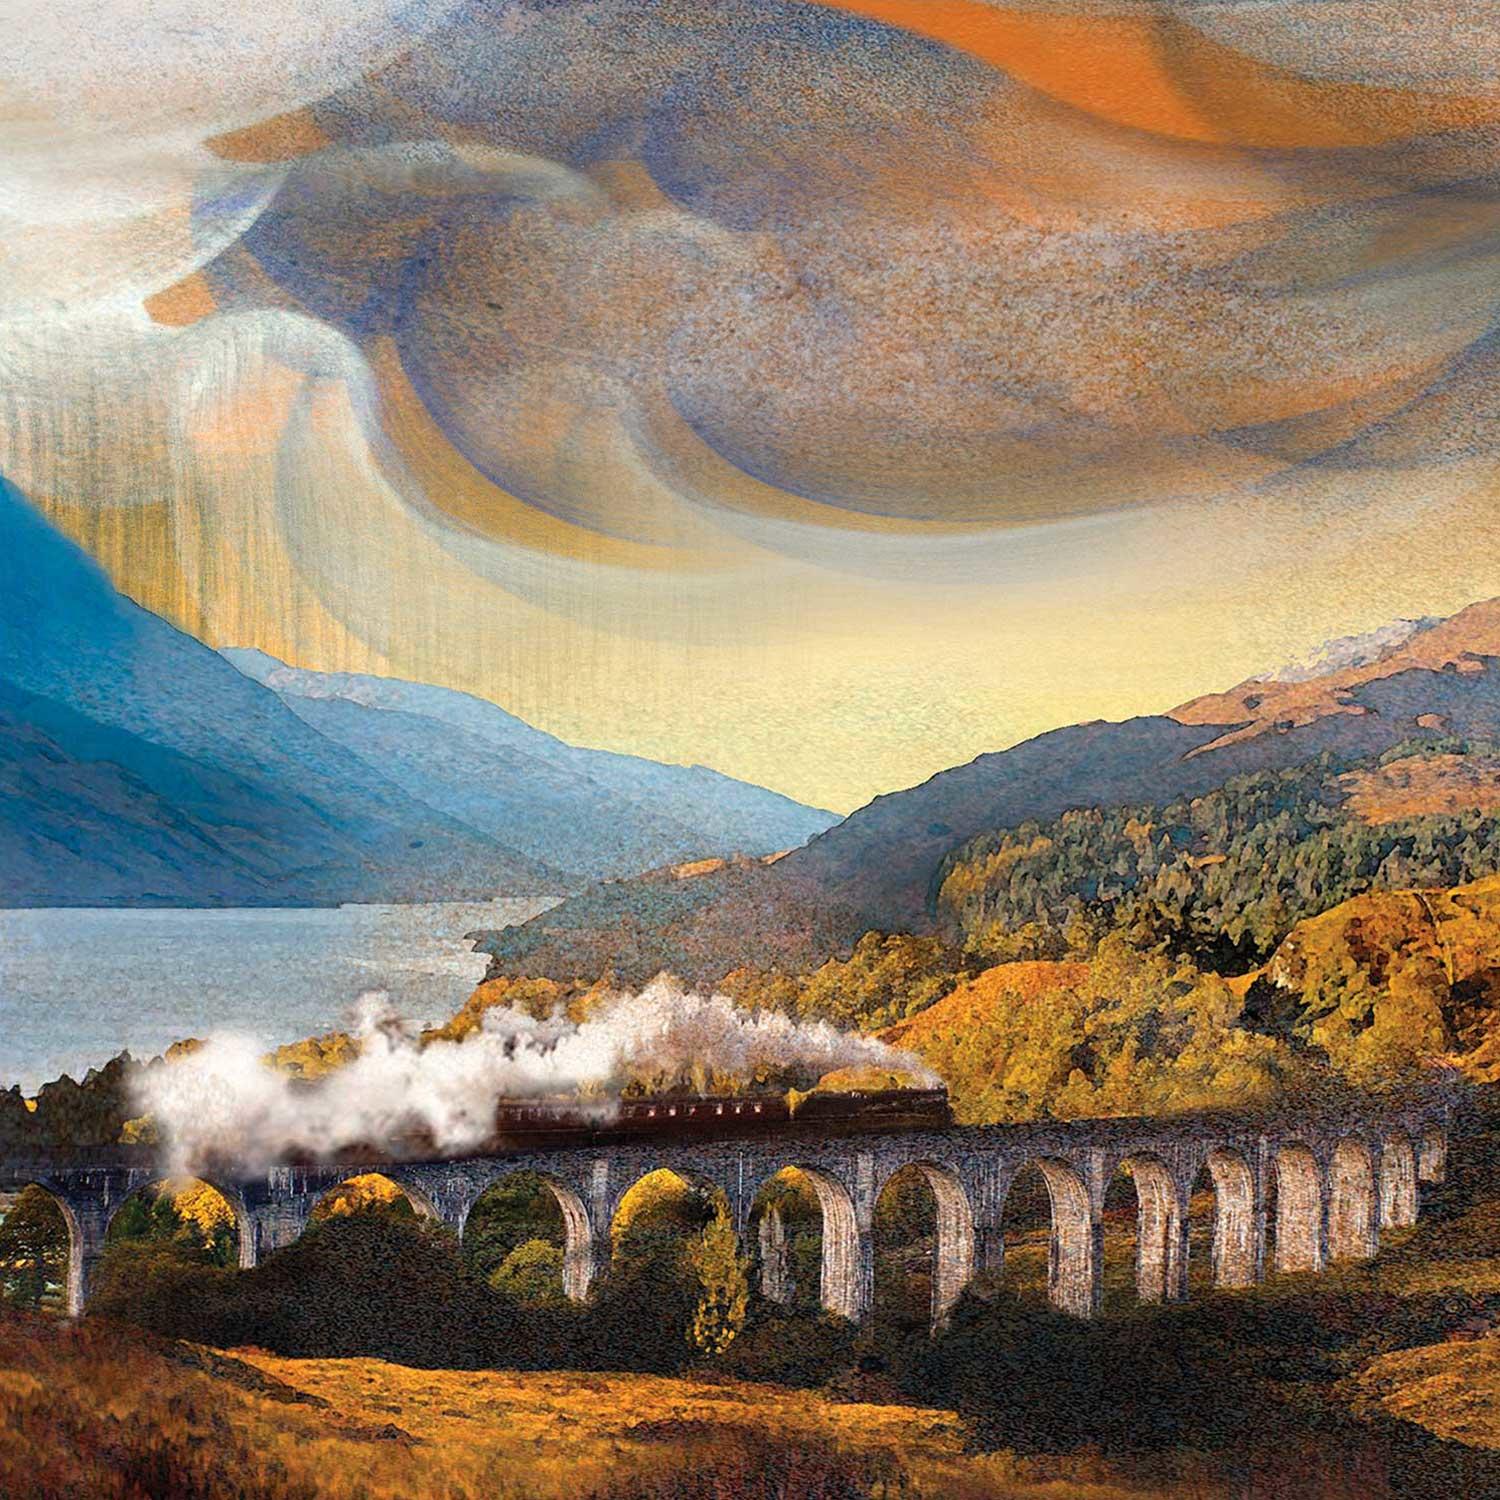 Steemin’ Up Glenfinnan, Inverness-shire by Esther Cohen